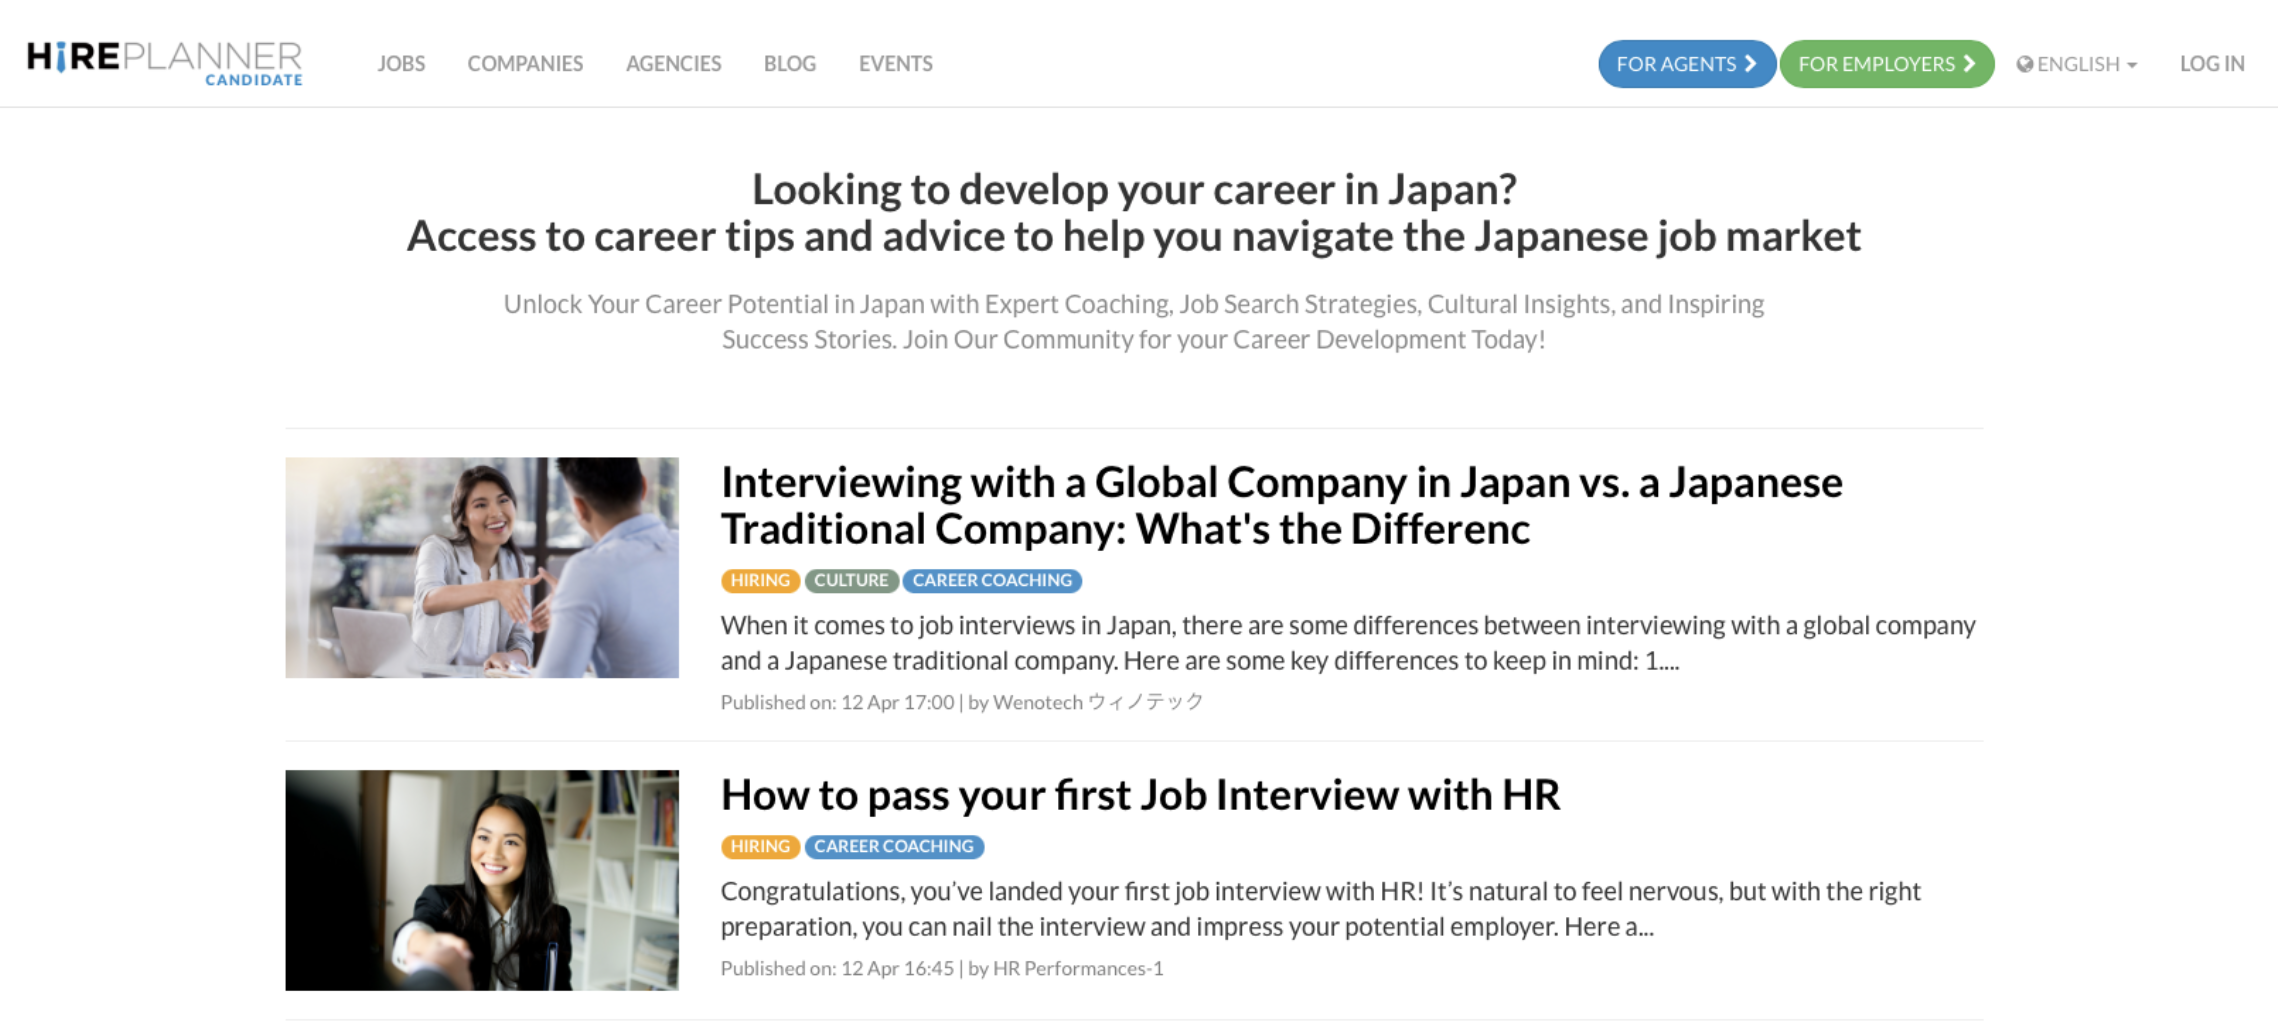 HirePlanner.com Releases New Employer Branding “Blog” Designed For Companies Recruiting in Japan